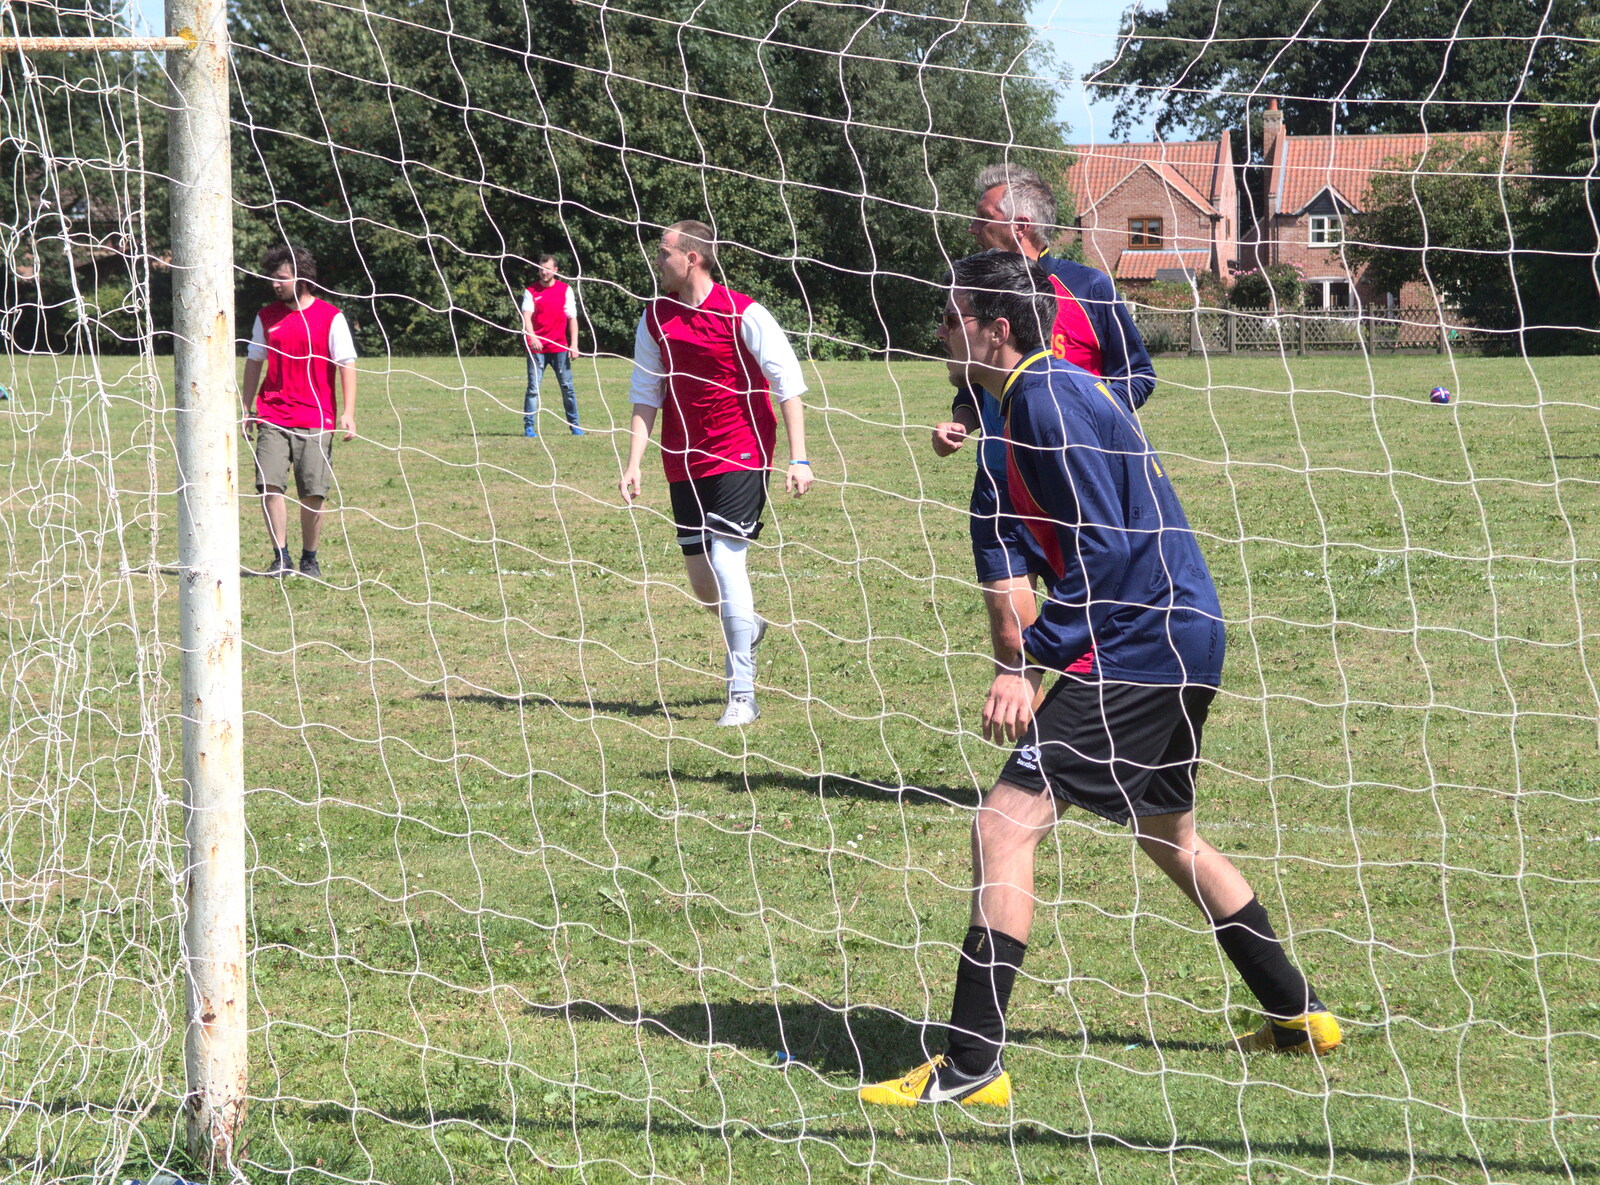 A charity footbal match occurs nearby from The Humpty Dumpty Beer Festival, Reedham, Norfolk - 22nd July 2017